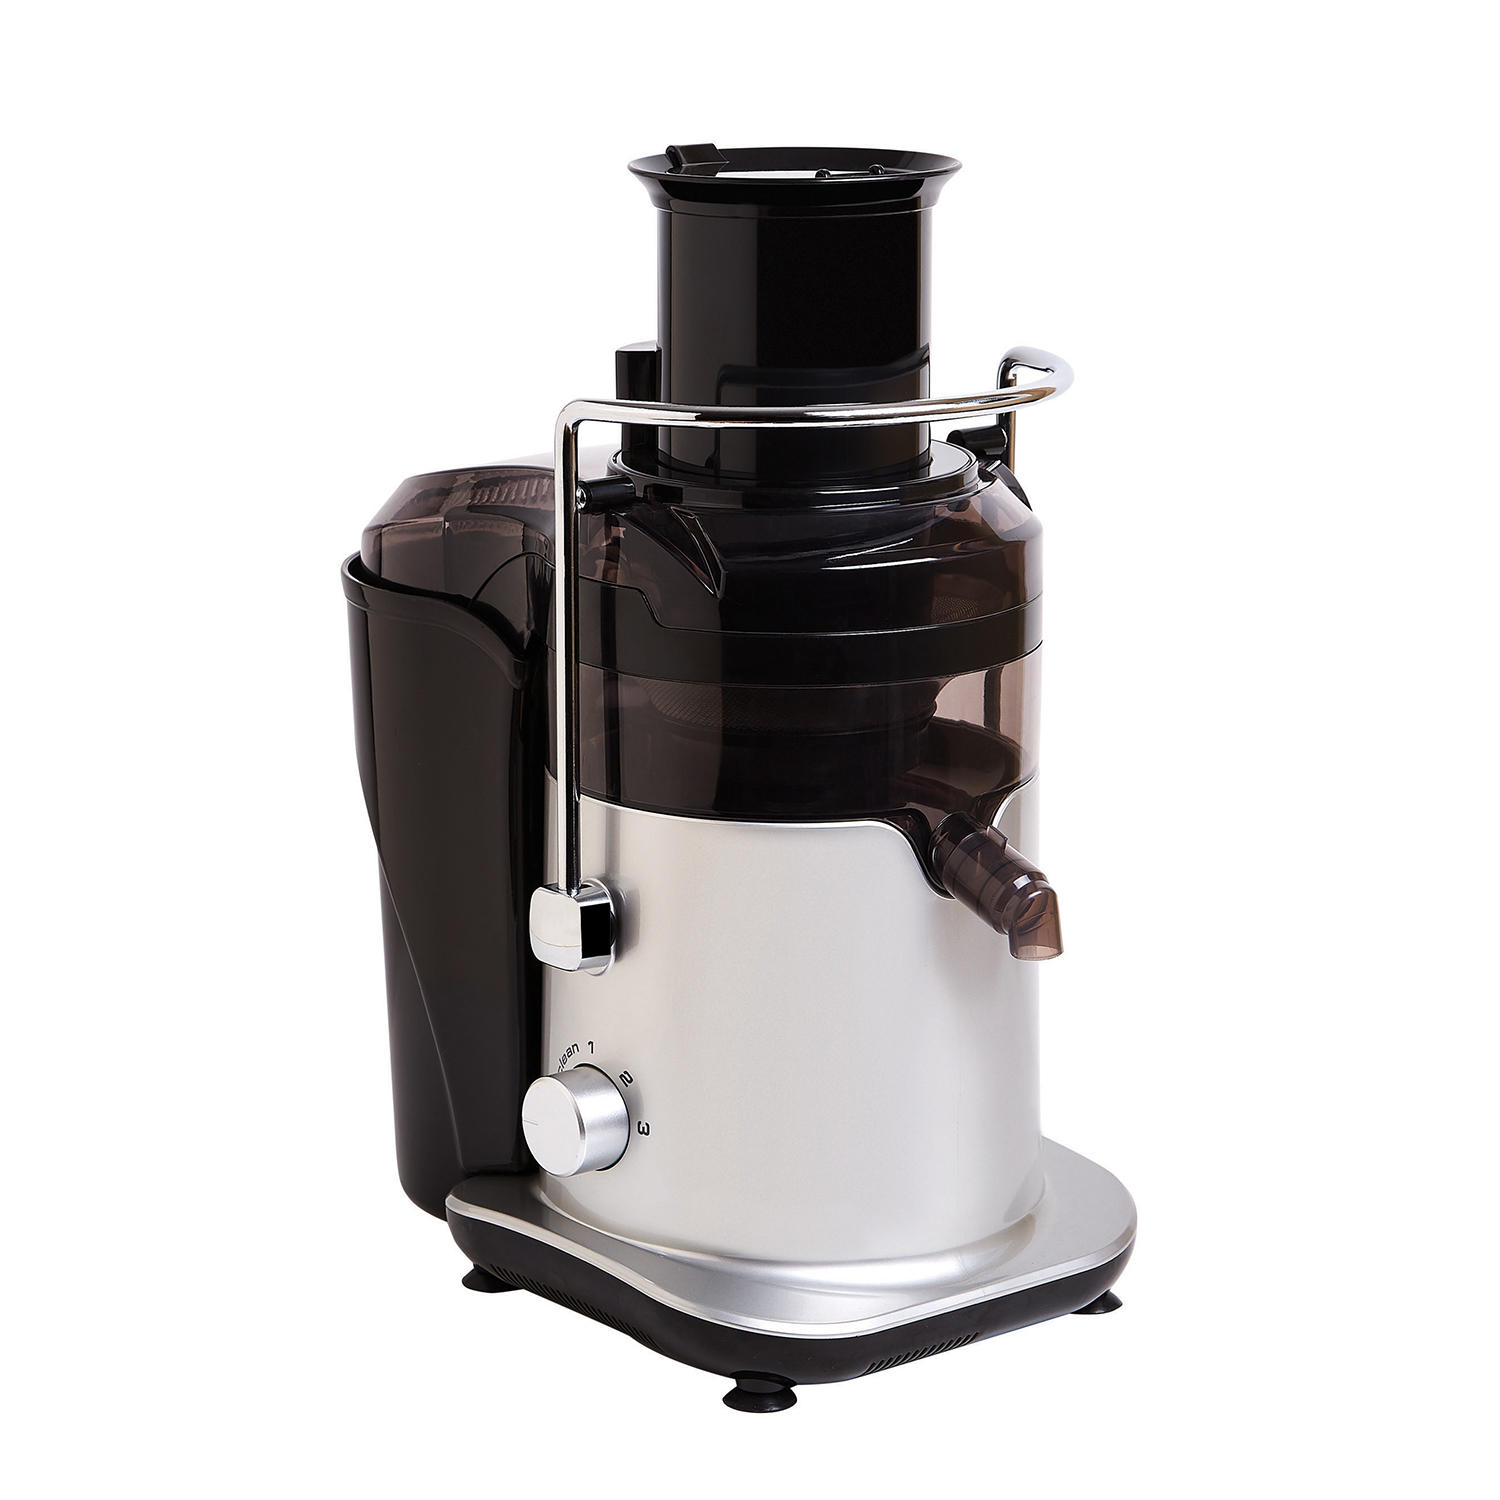 PowerXL Self-Cleaning 3-Speed Centrifugal Juicer